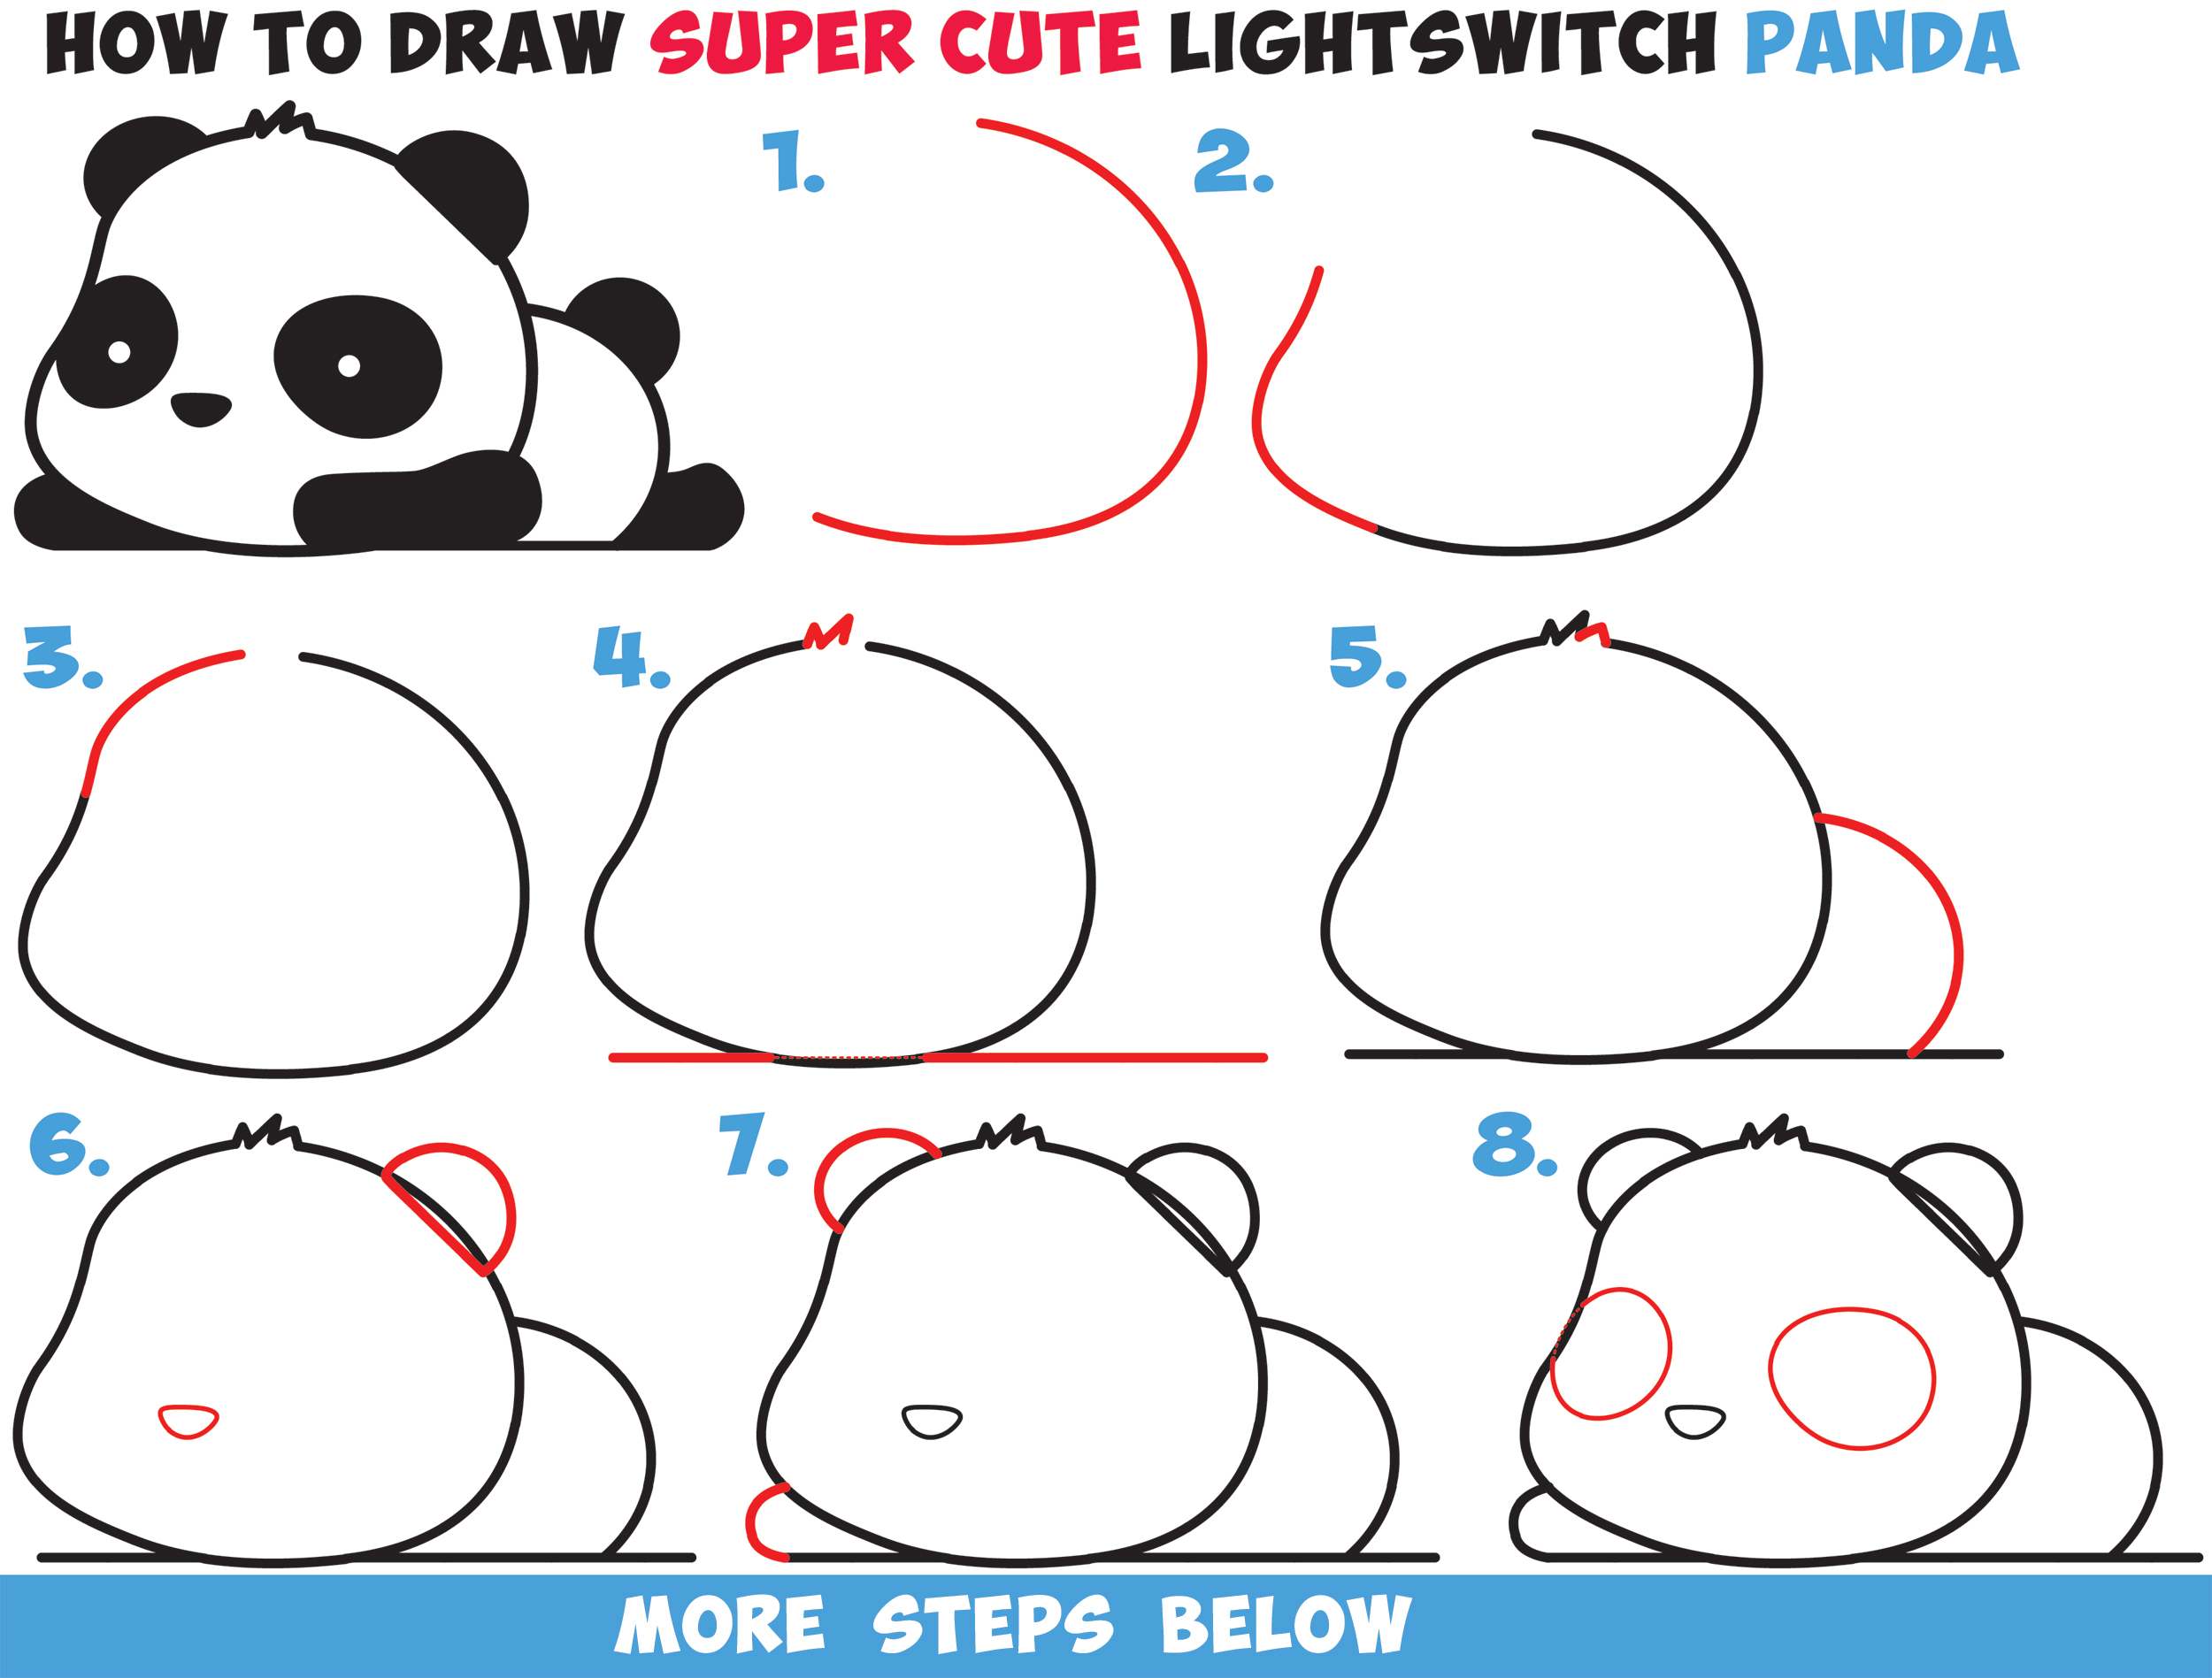 How To Draw A Super Cute Kawaii Panda Bear Laying Down Easy Step By Step Drawing Tutorial For